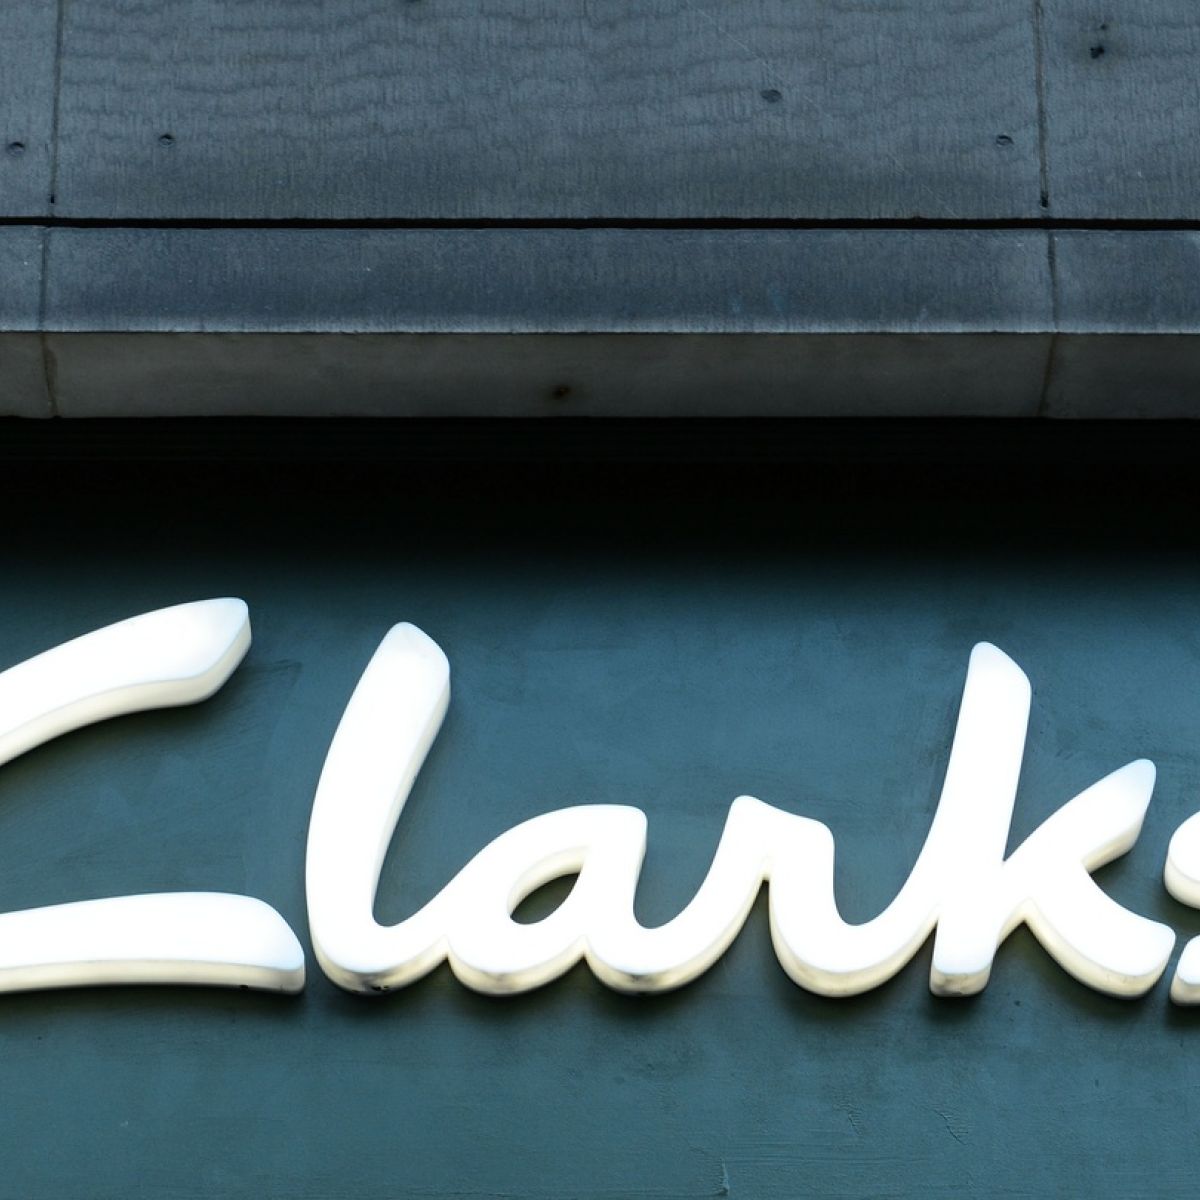 clarks shoes grafton street opening hours